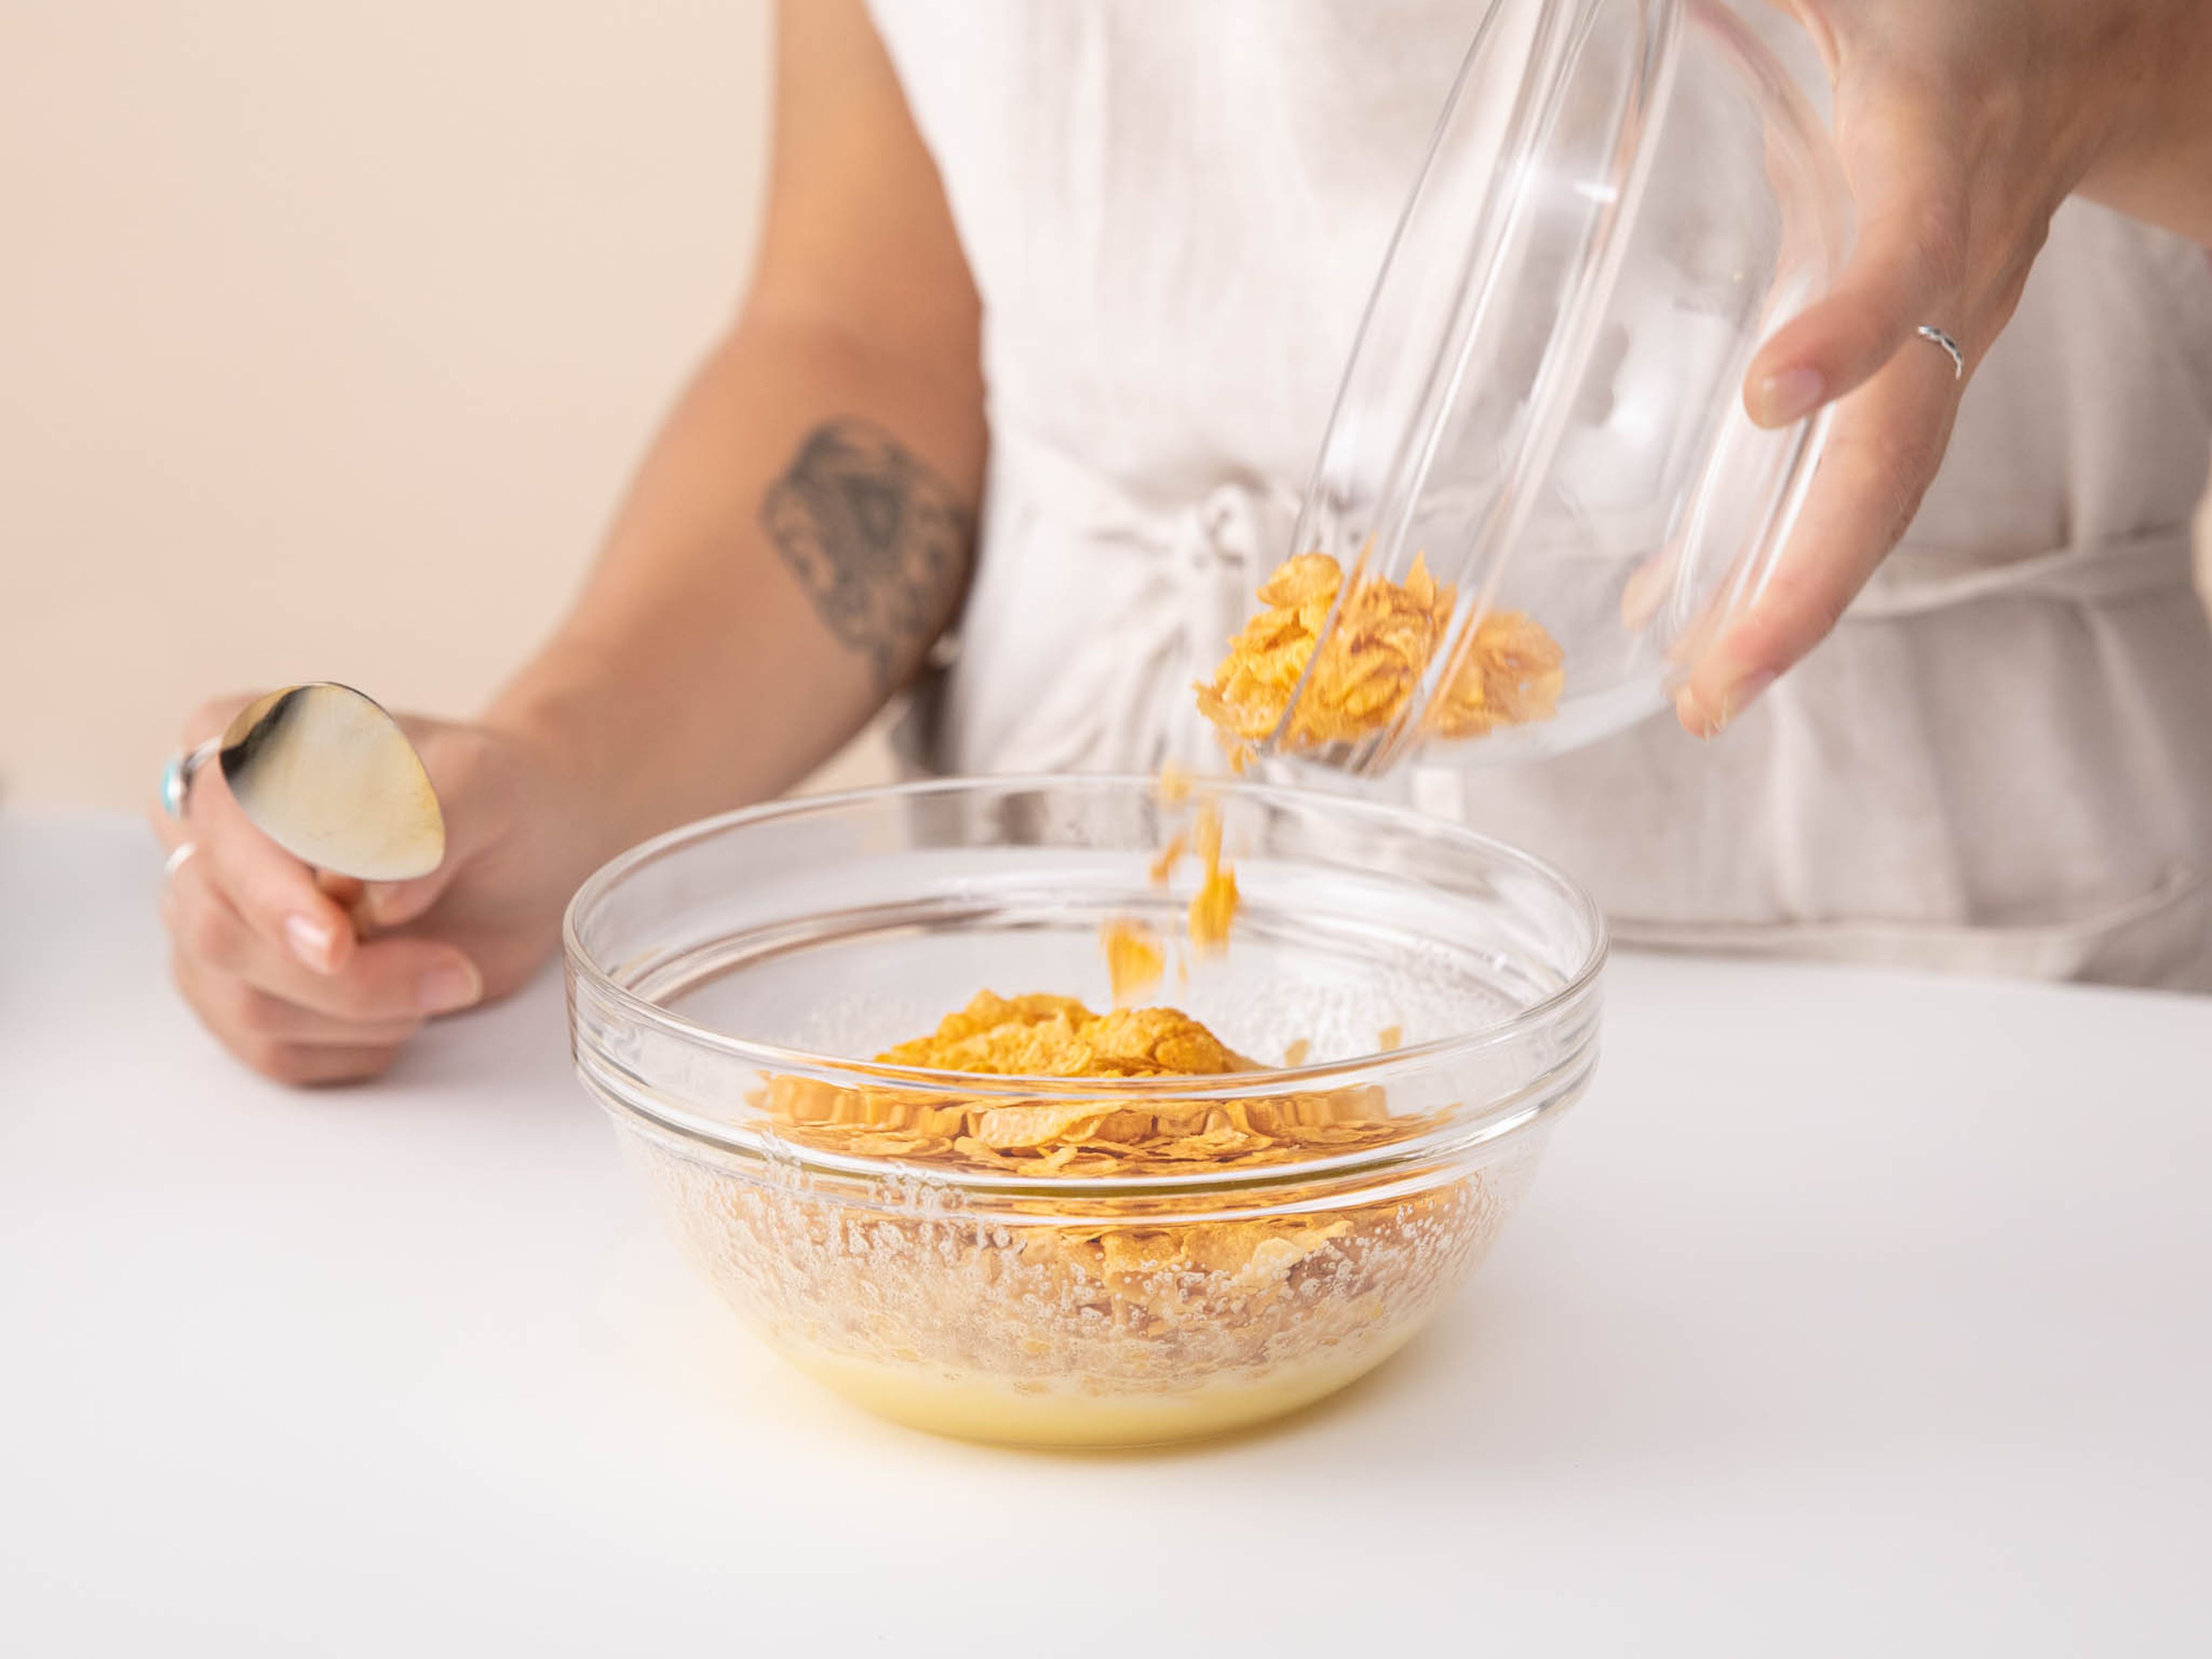 Preheat oven to 160°C/325°F.  Whisk sugar and egg together in a bowl until well combined. Add cornflakes and mix until evenly coated with the mixture.